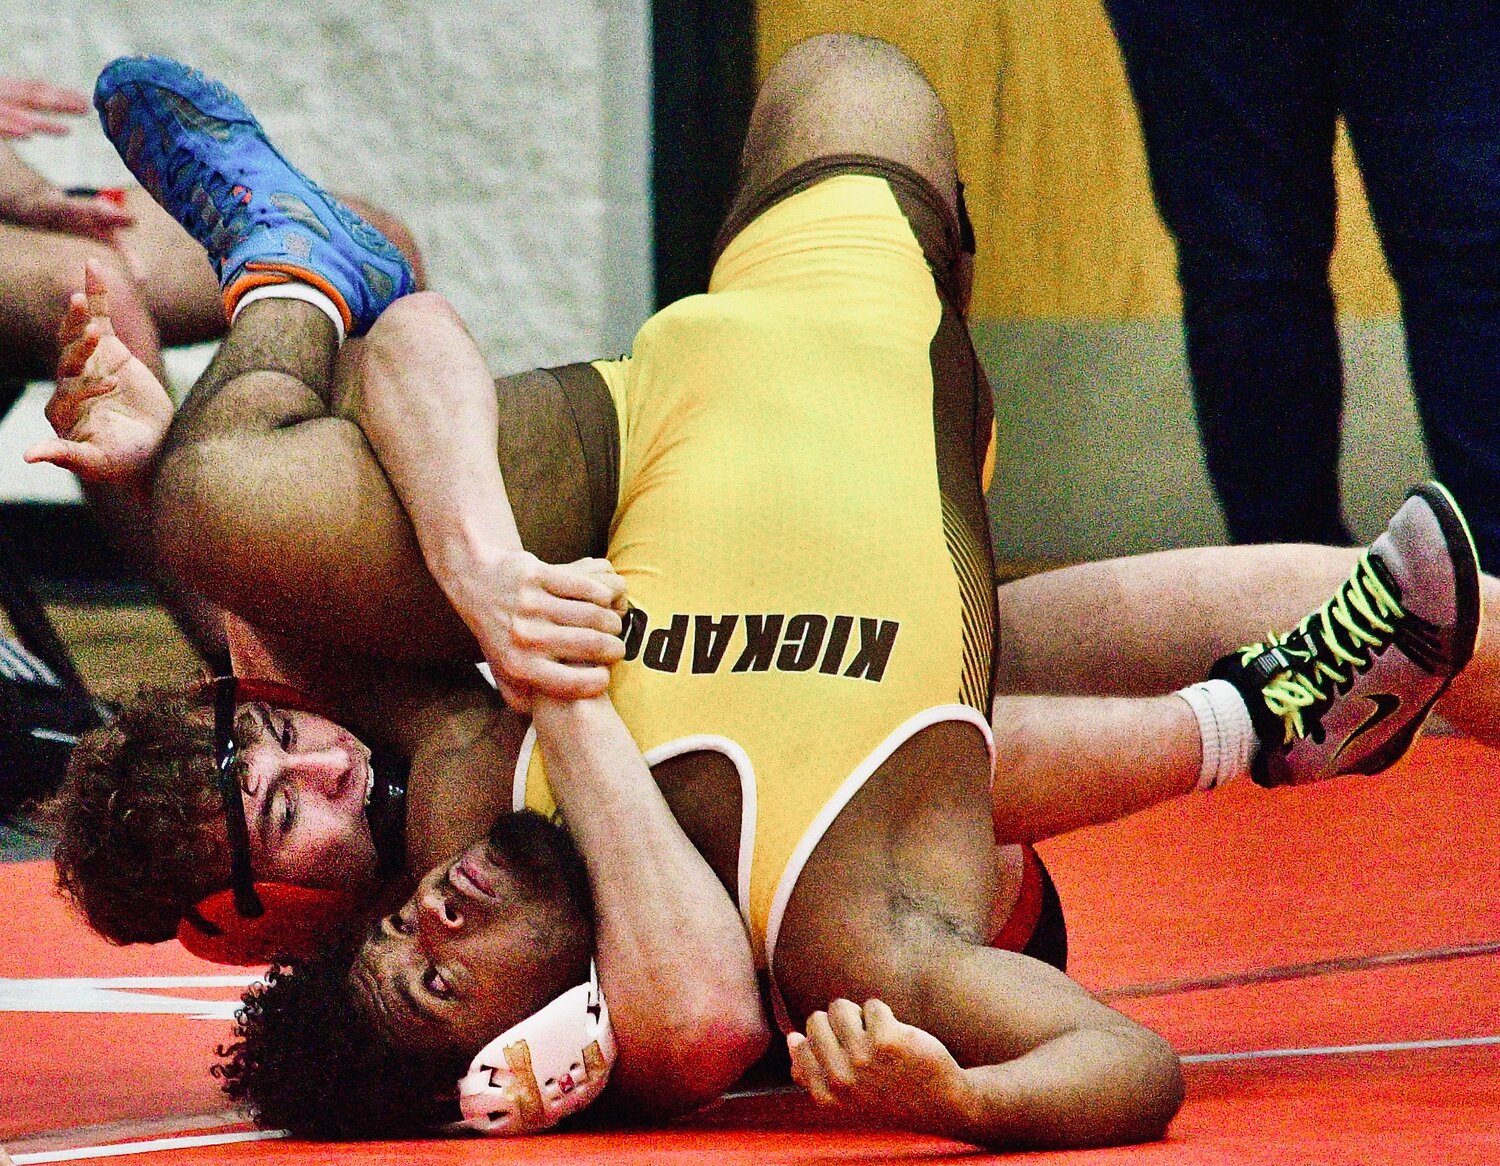 OZARK'S JOHNNY WILLIAMS takes control of his opponent.